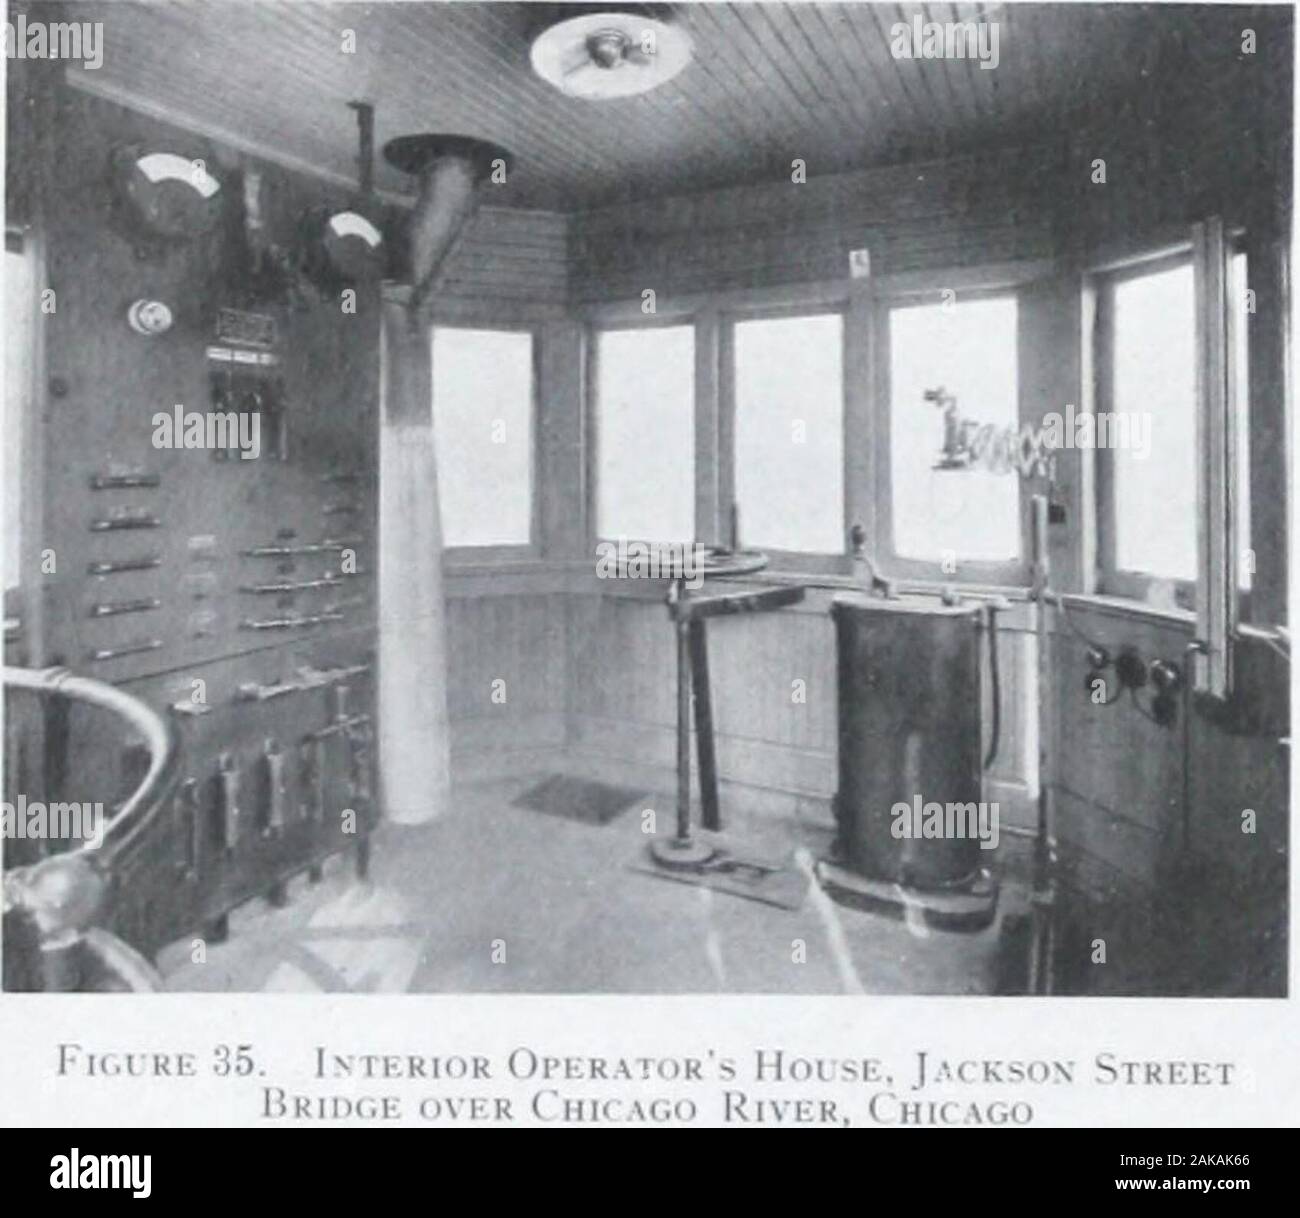 The Strauss Bascule Bridge Company, Inc., engineers and designers of trunnion, bascule and direct lift bridges. . partially seen i .). OIKRATOR* MKNT: The Opera* apparatus for the com of the structure. T switchboard on which mi ondarv switches, cir instruments, the controllers for the main leaf motors, i ontrollers for the motors, Ii having lice egress ider fins deviceES l&gt; EQUIP- B contains all the trol and operationides the electric ted the main and breakers and recording The Strauss Bascule Bridge Company trolling valves lor the brakes, controller* lor road-way and sidewalk gales, indi Stock Photo